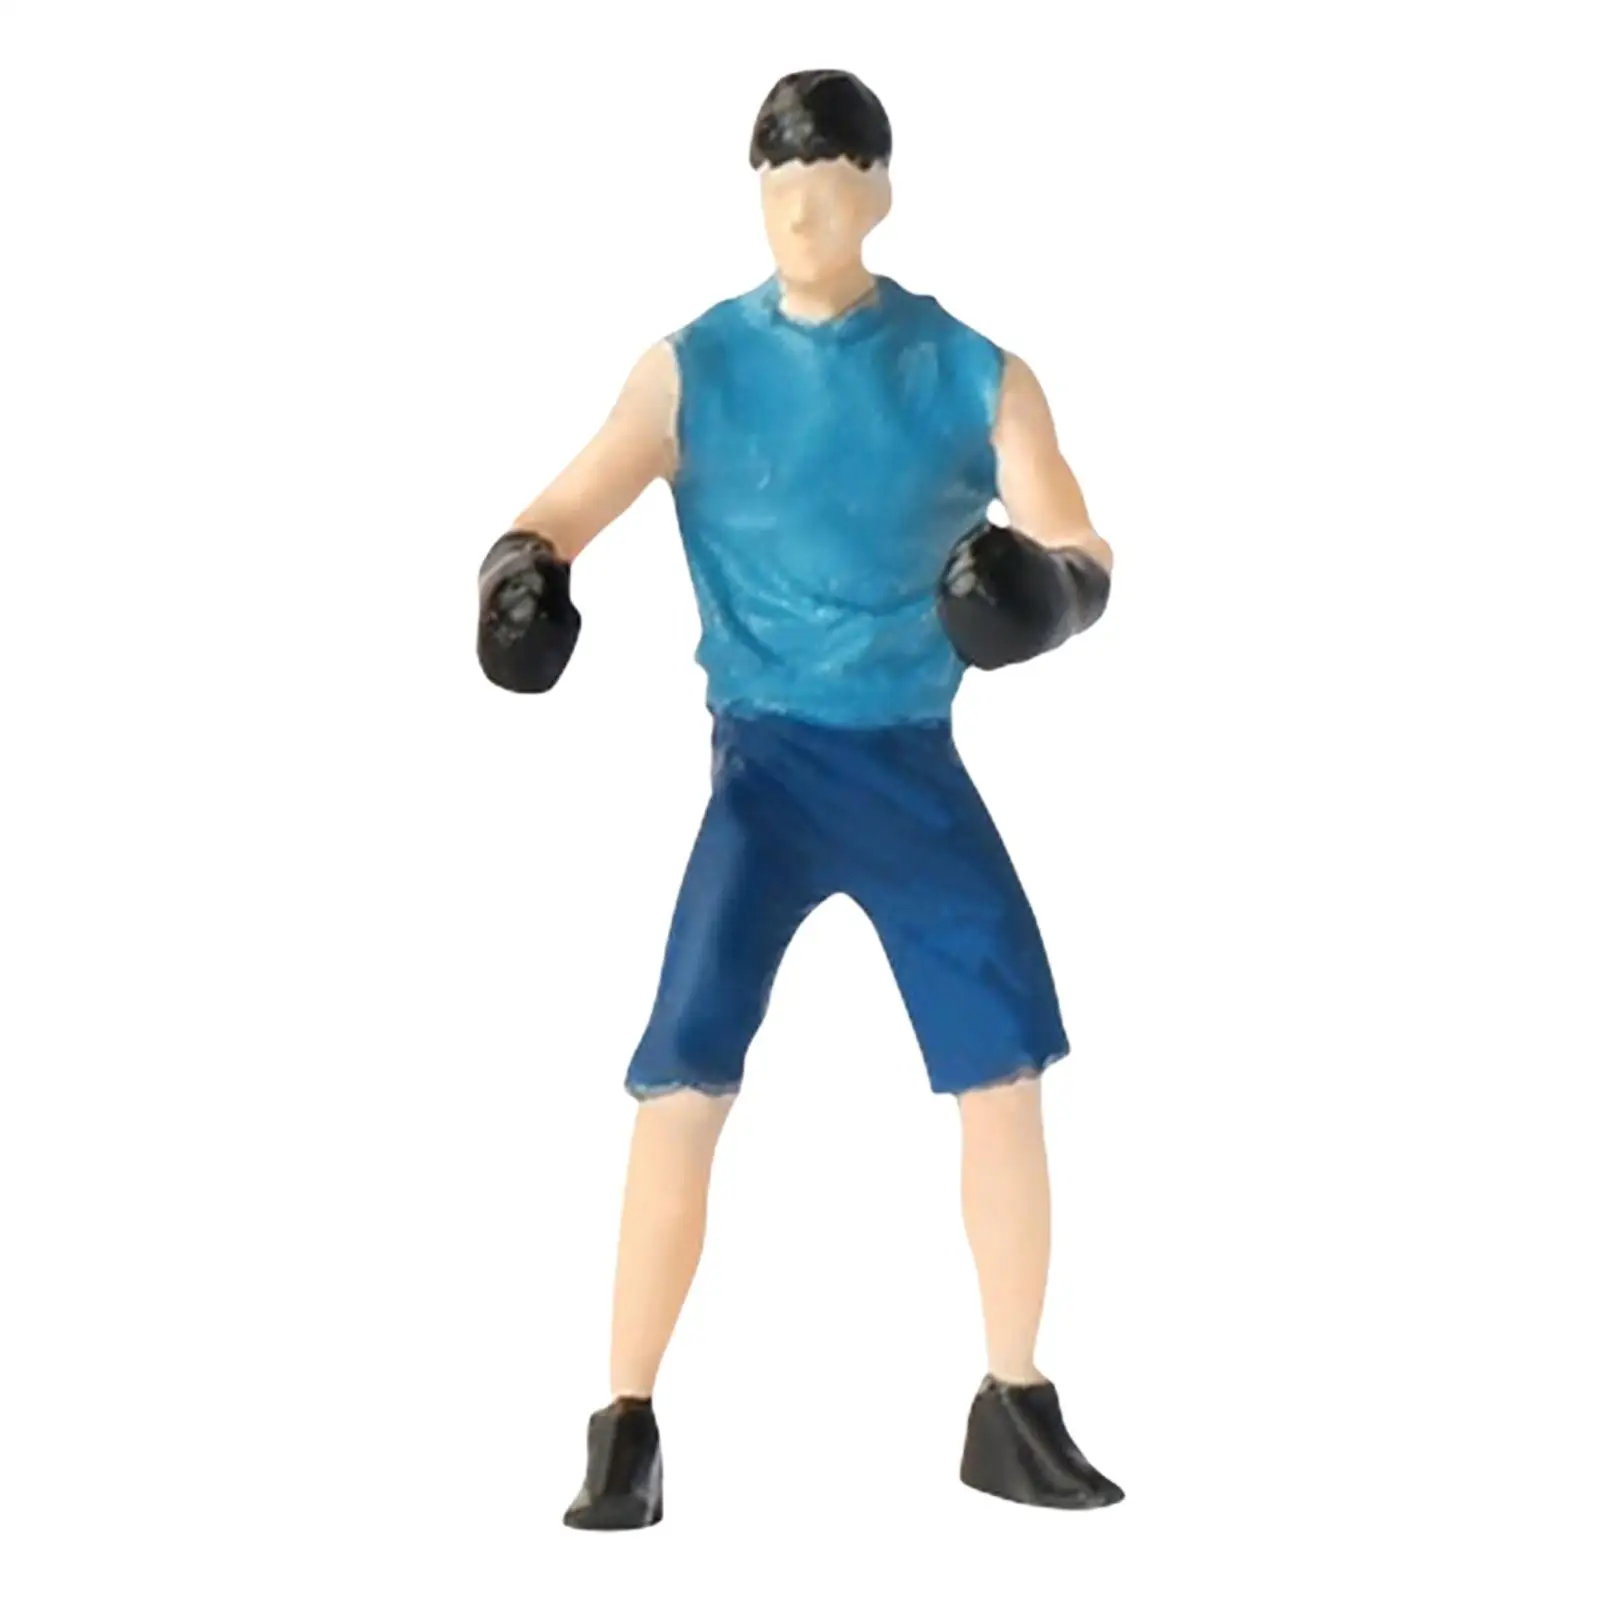 Mini 1:64 Figures Boxing Figurines for Miniature Scene Photography Props